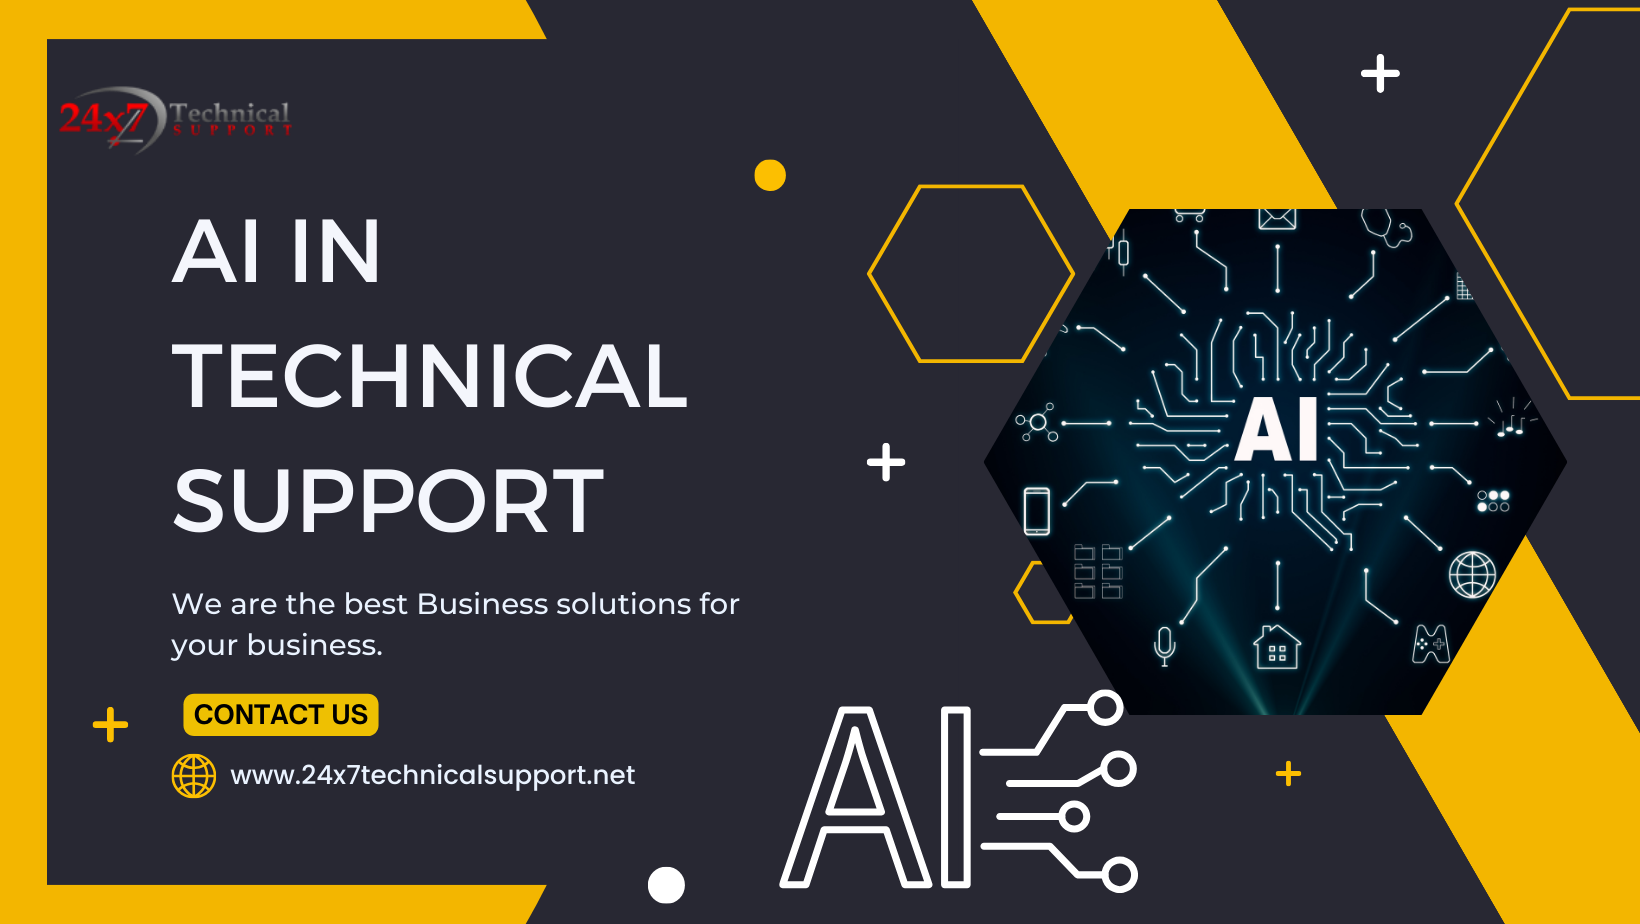 AI Technical Support